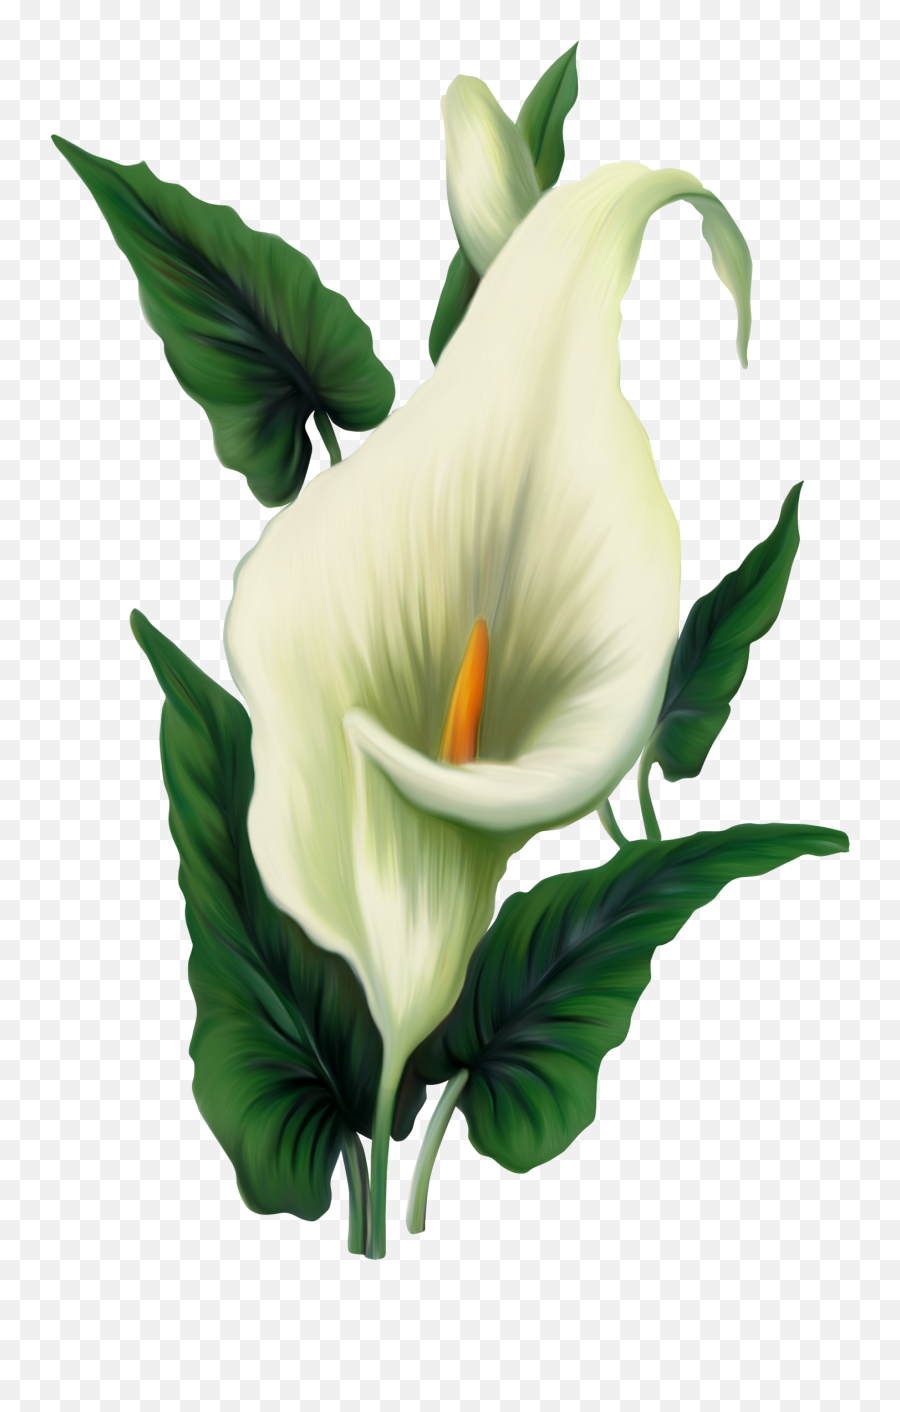 Lilies Transparent Png 46478 - Free Icons And Png Backgrounds Flower Peace Lily Png,Lily Transparent Background